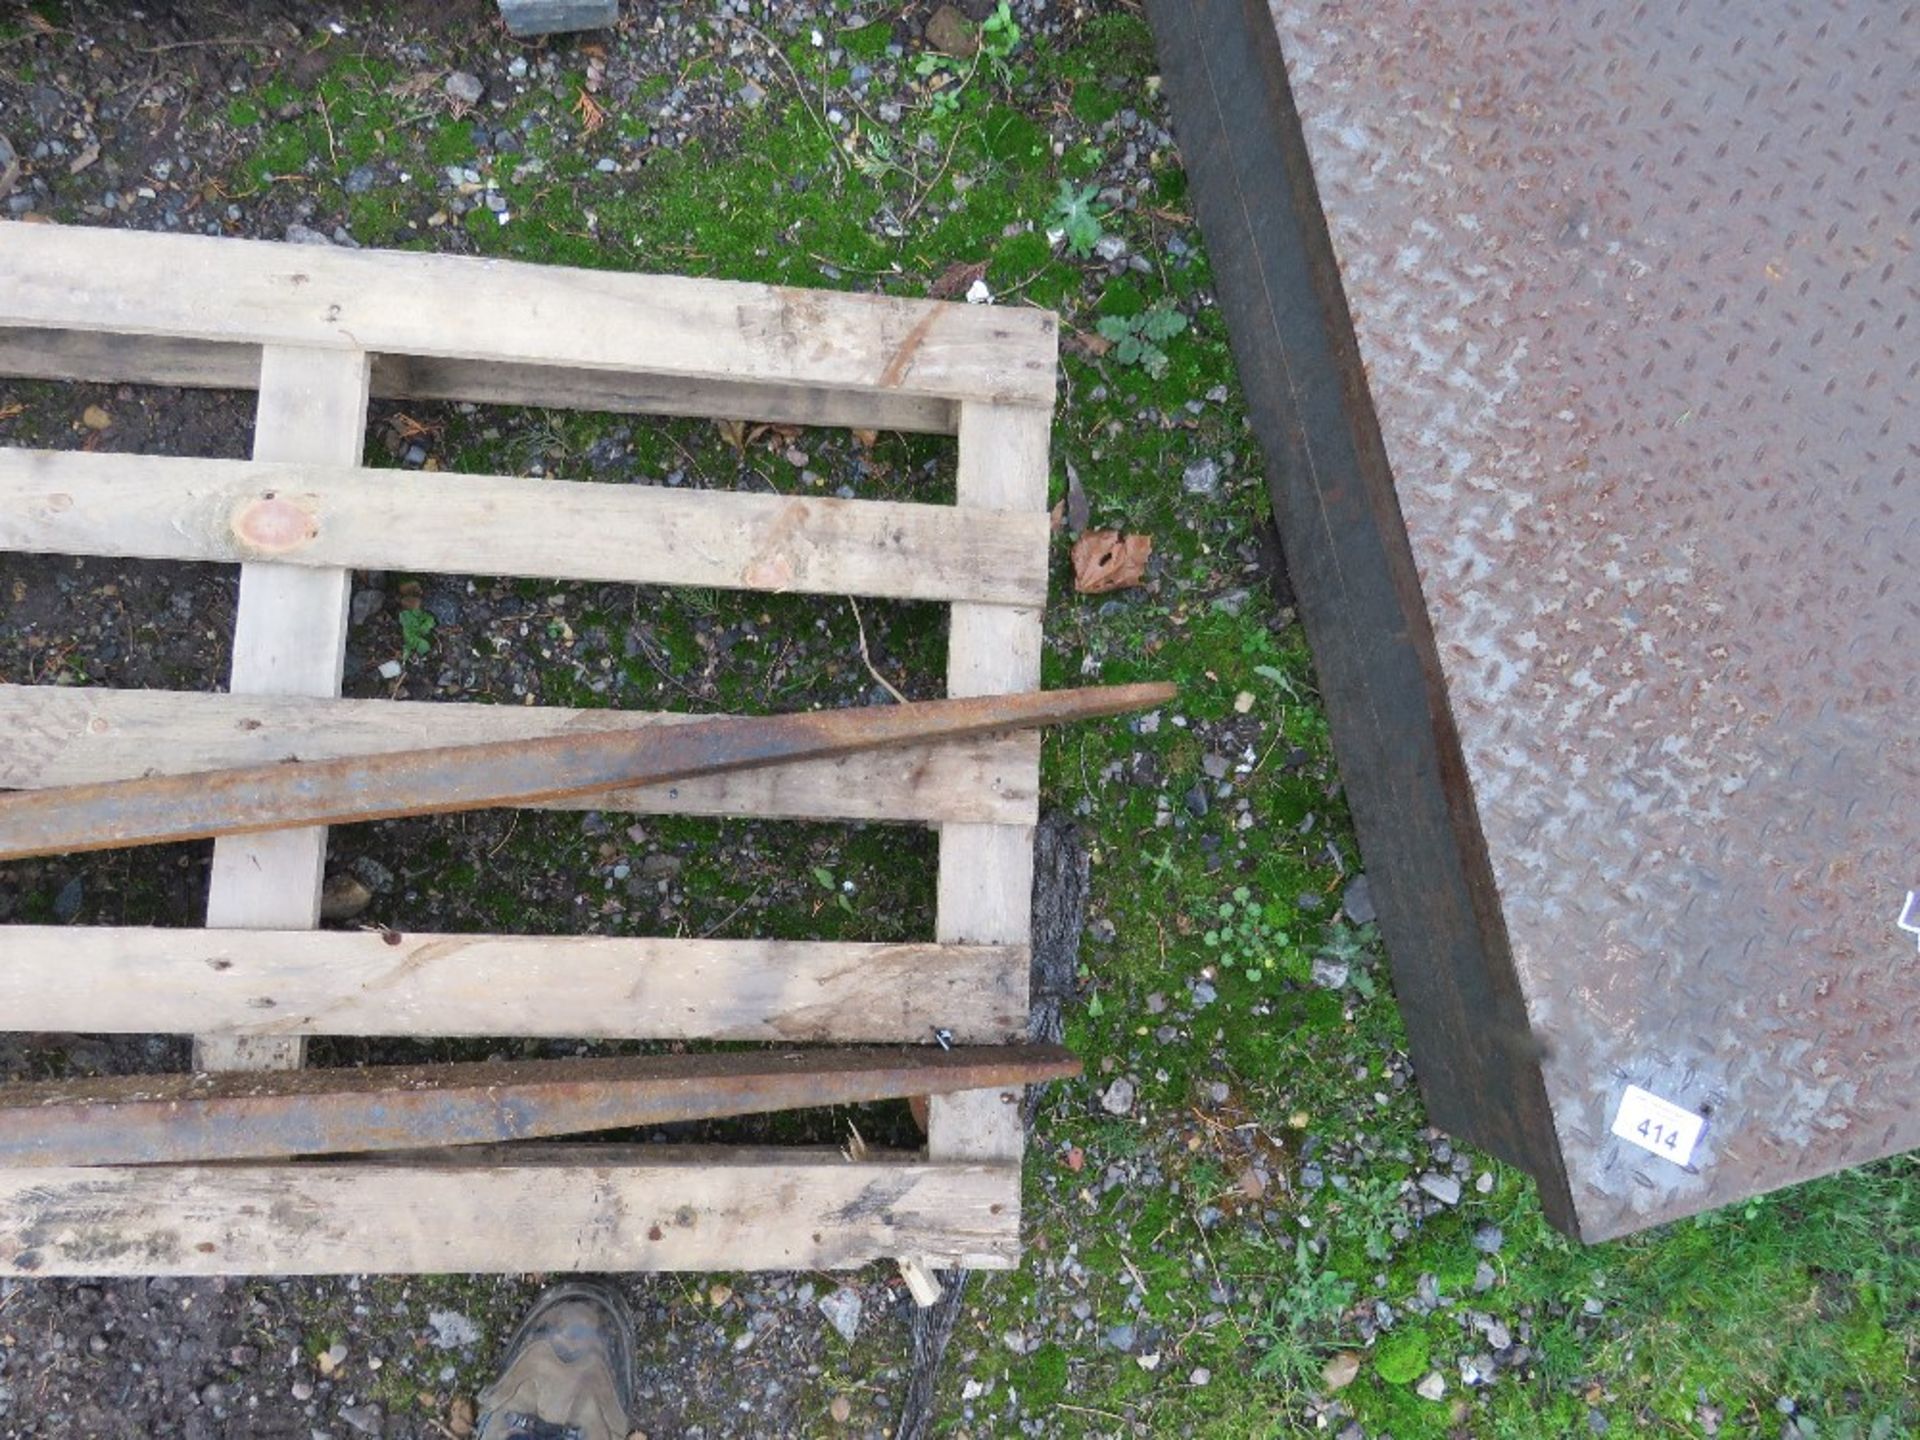 PAIR OF FORKLIFT TINES, 16" CARRIAGE. EX COMPANY LIQUIDATION. - Image 2 of 2